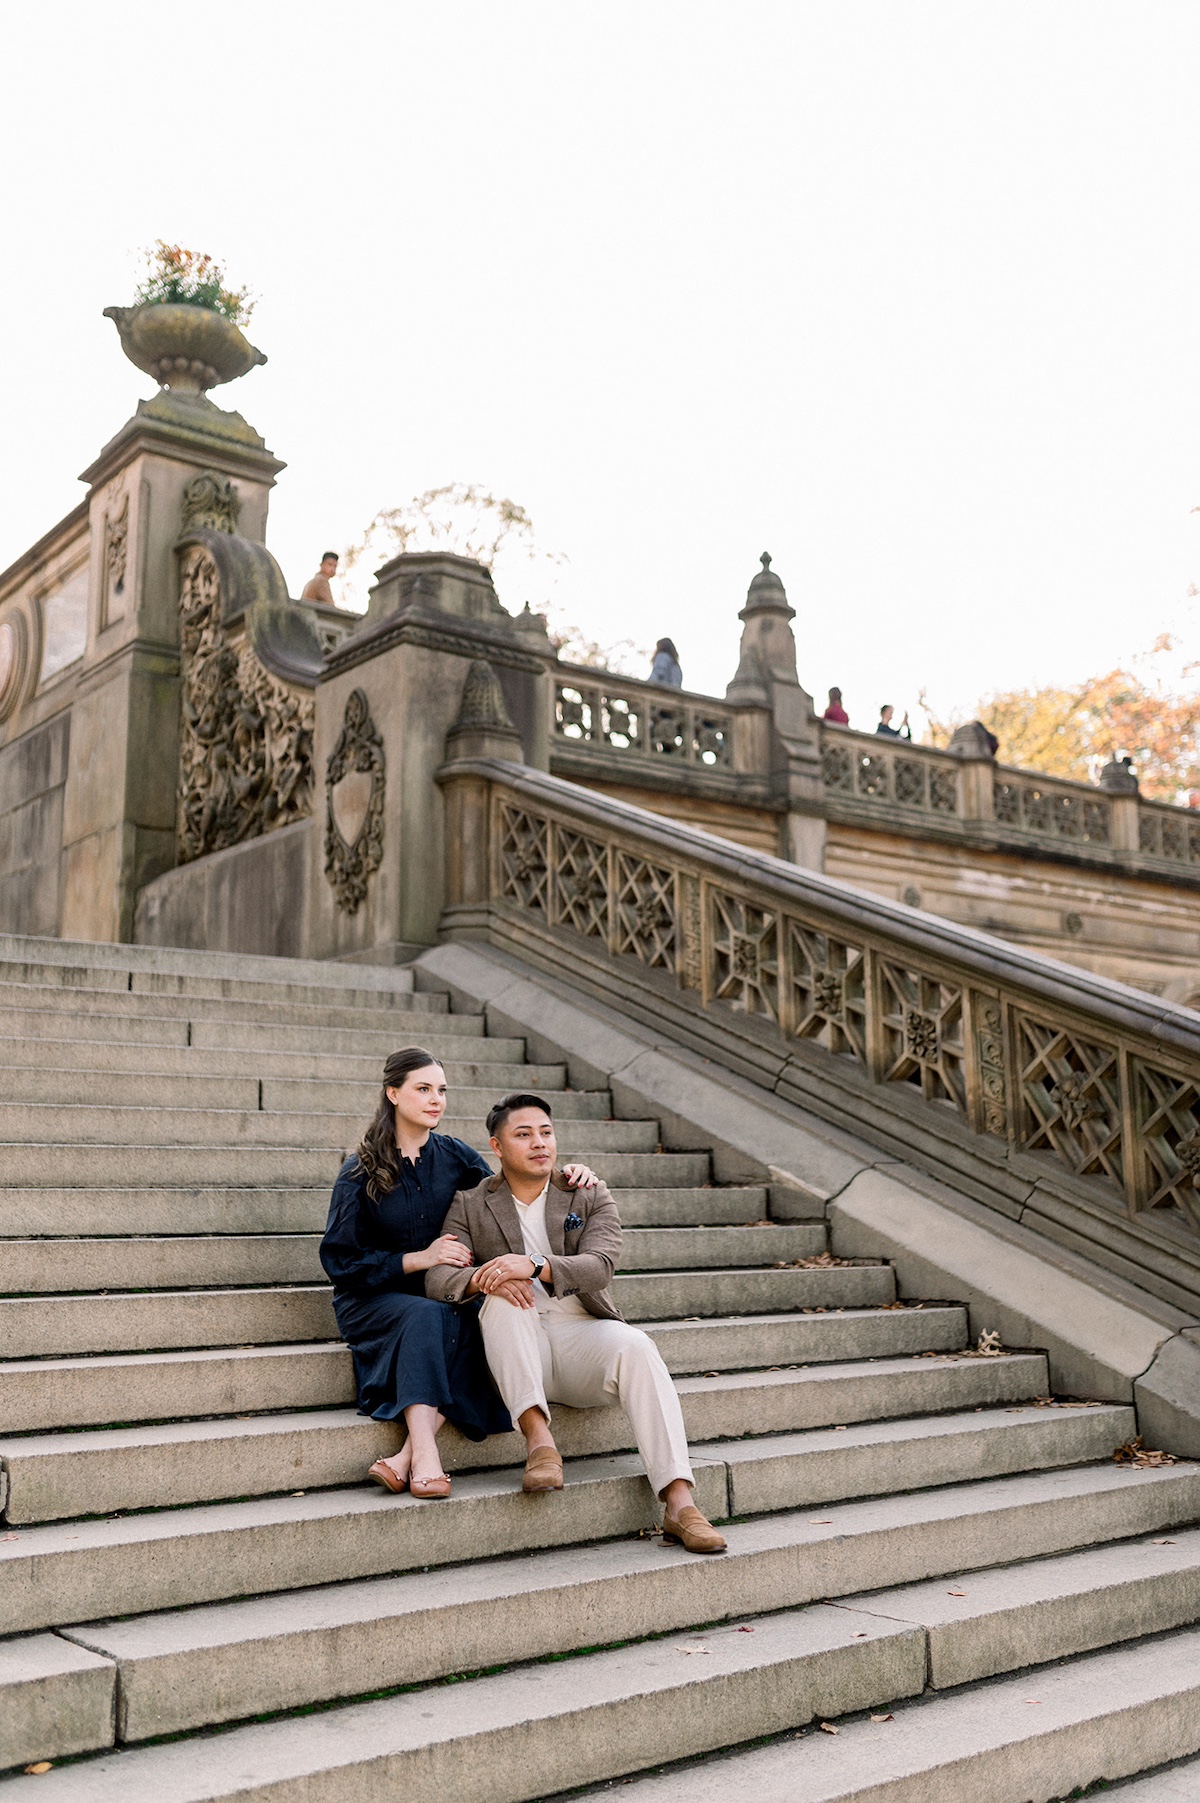 Symphony Estrada's rebrand takes shape with a luxury brand photographer showcasing the symmetry and beauty of Bethesda Terrace in Central Park.